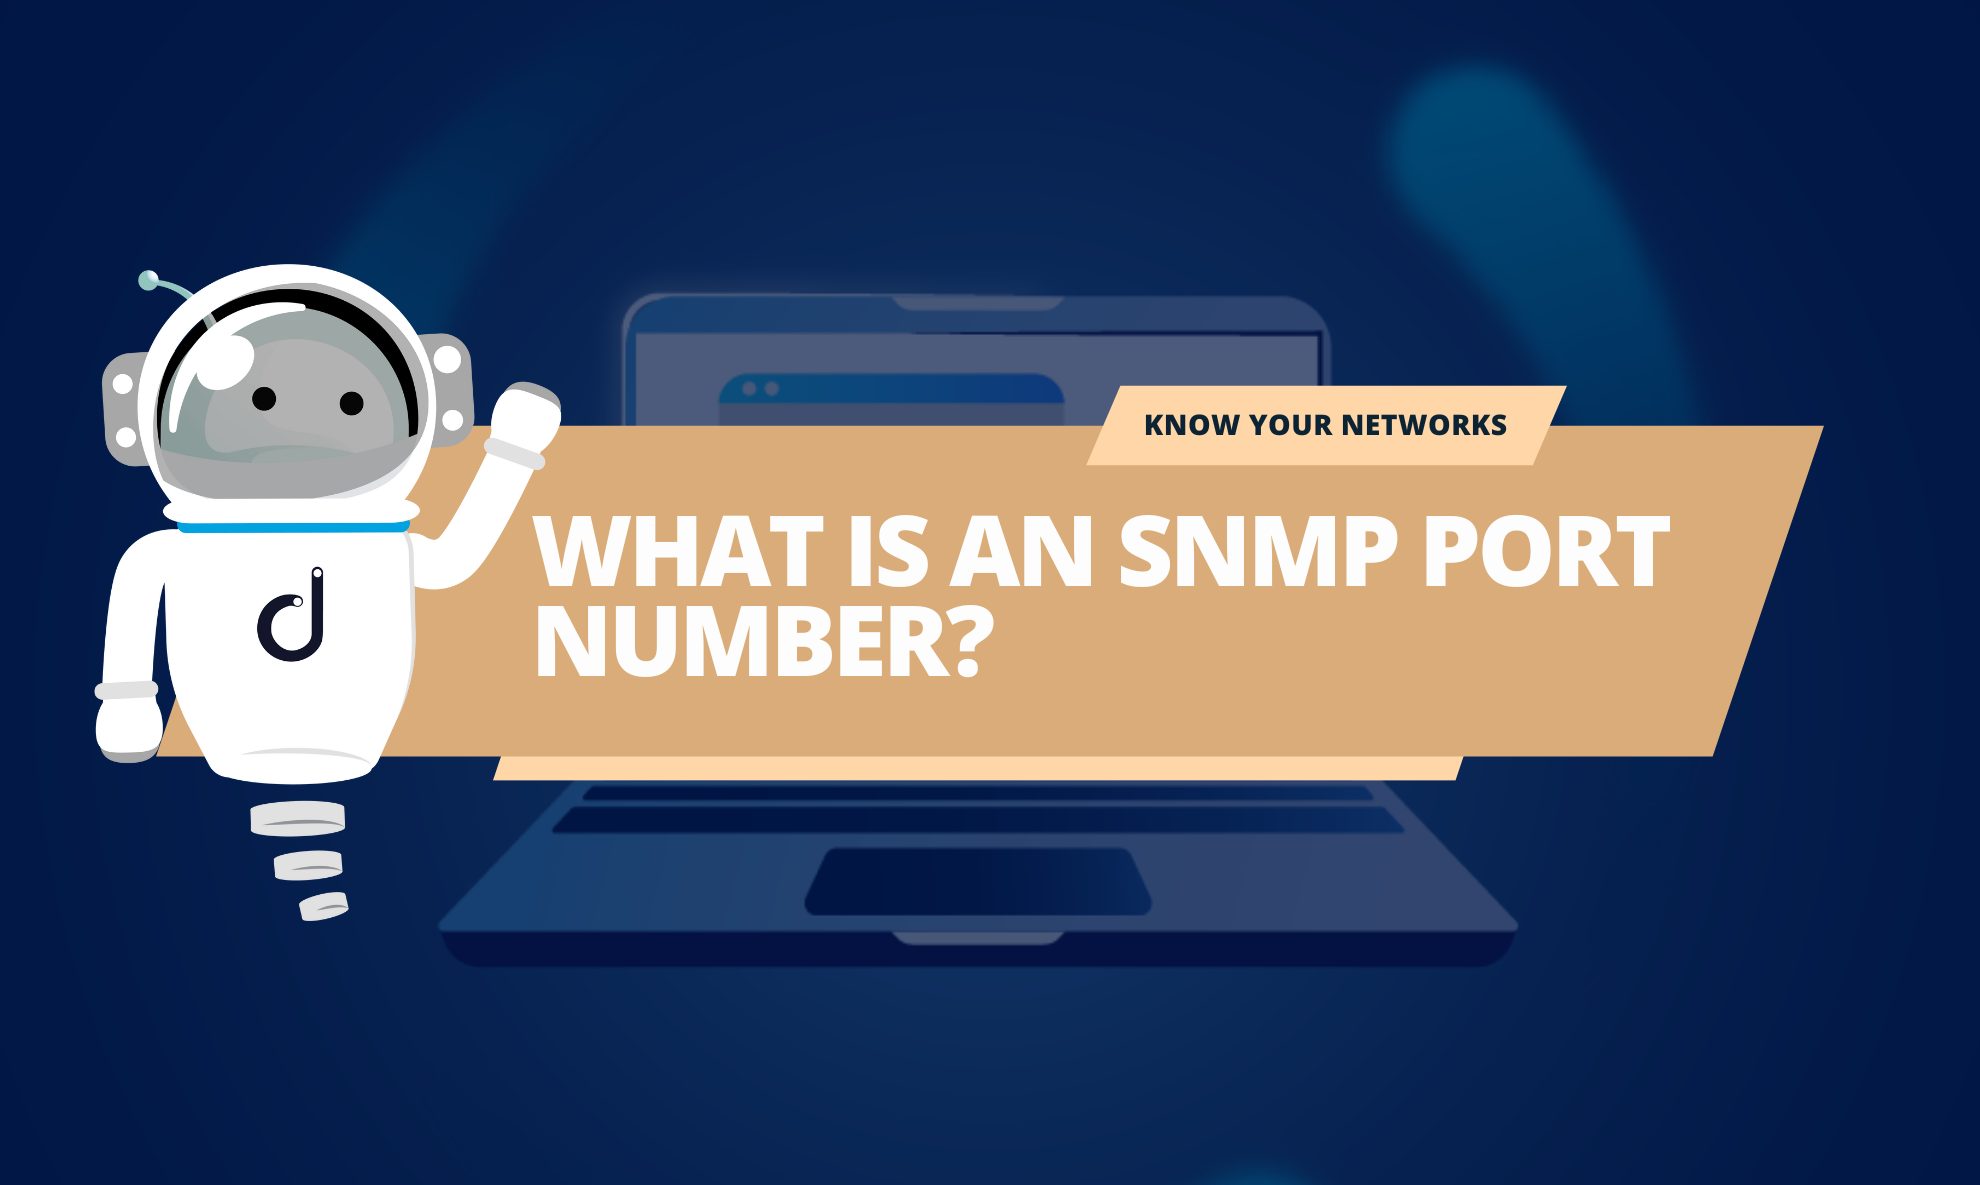 SNMP port number